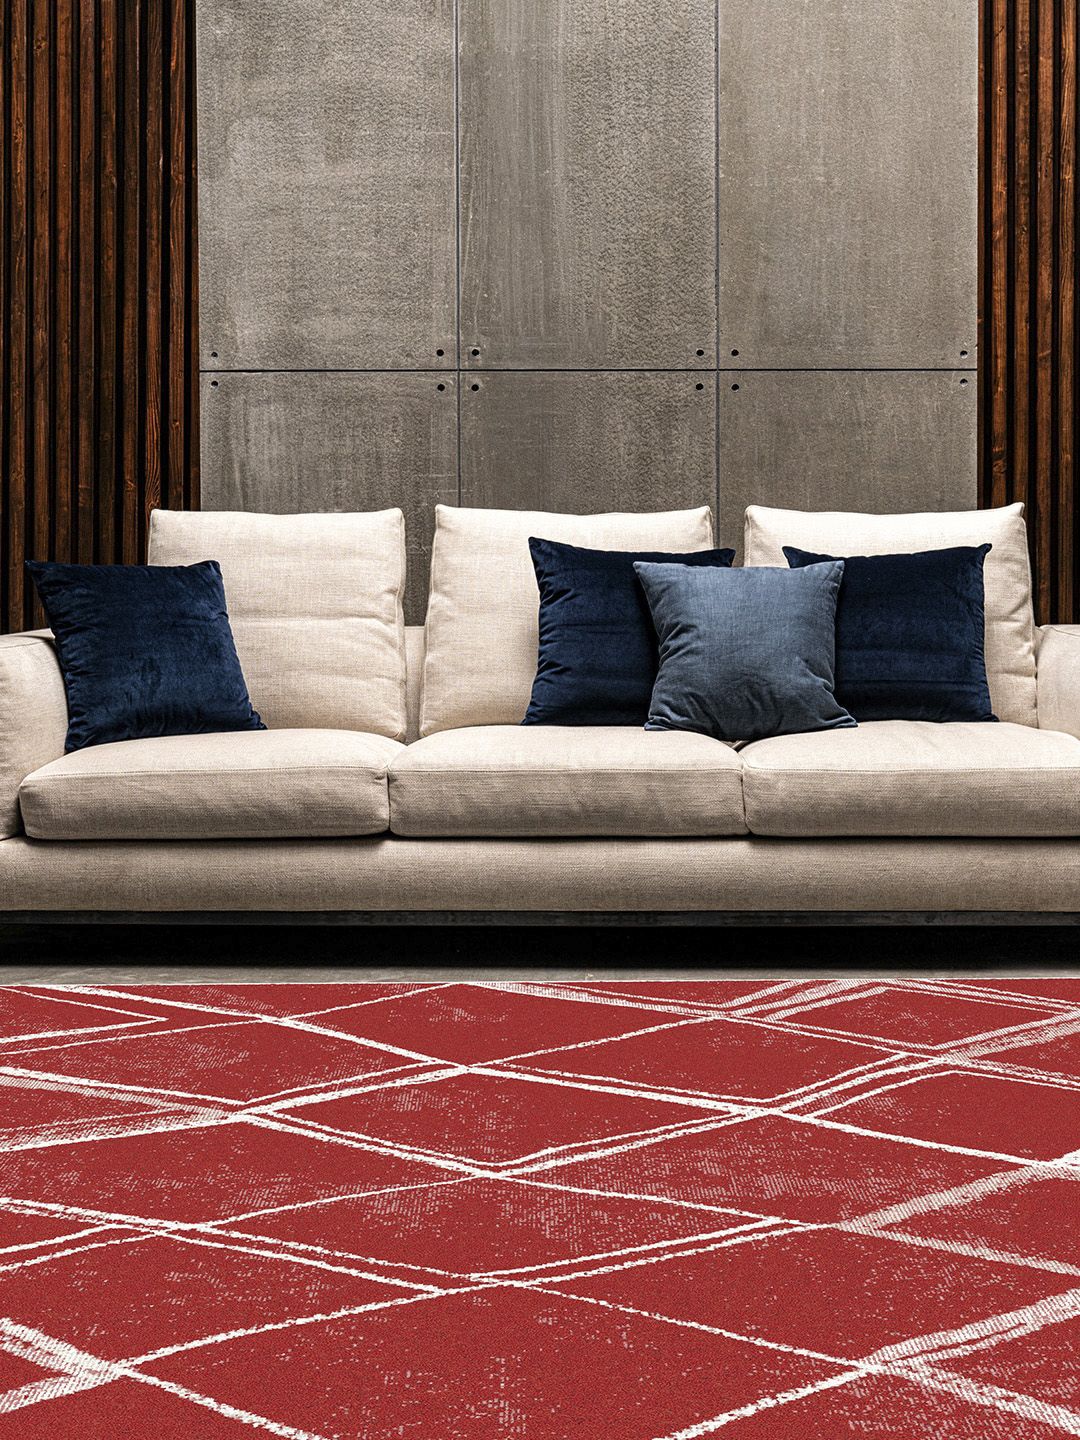 DDecor Red & White Abstract Carpet Price in India